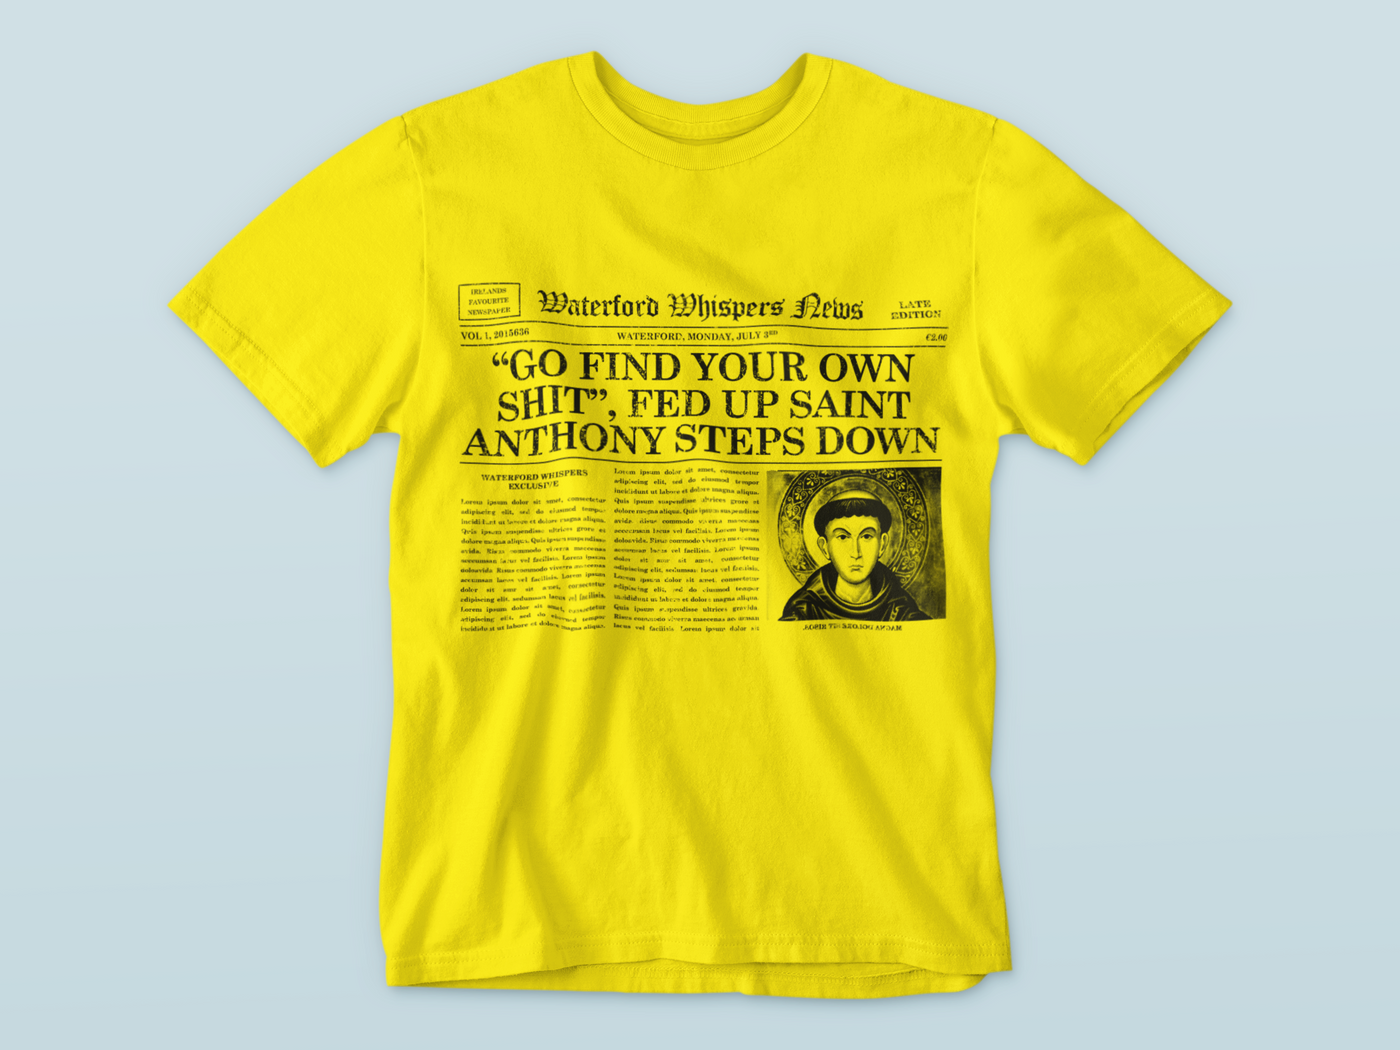 “Go Find Your Own Shit”, Fed Up Saint Anthony Steps Down - Premium WWN Headline T-shirt